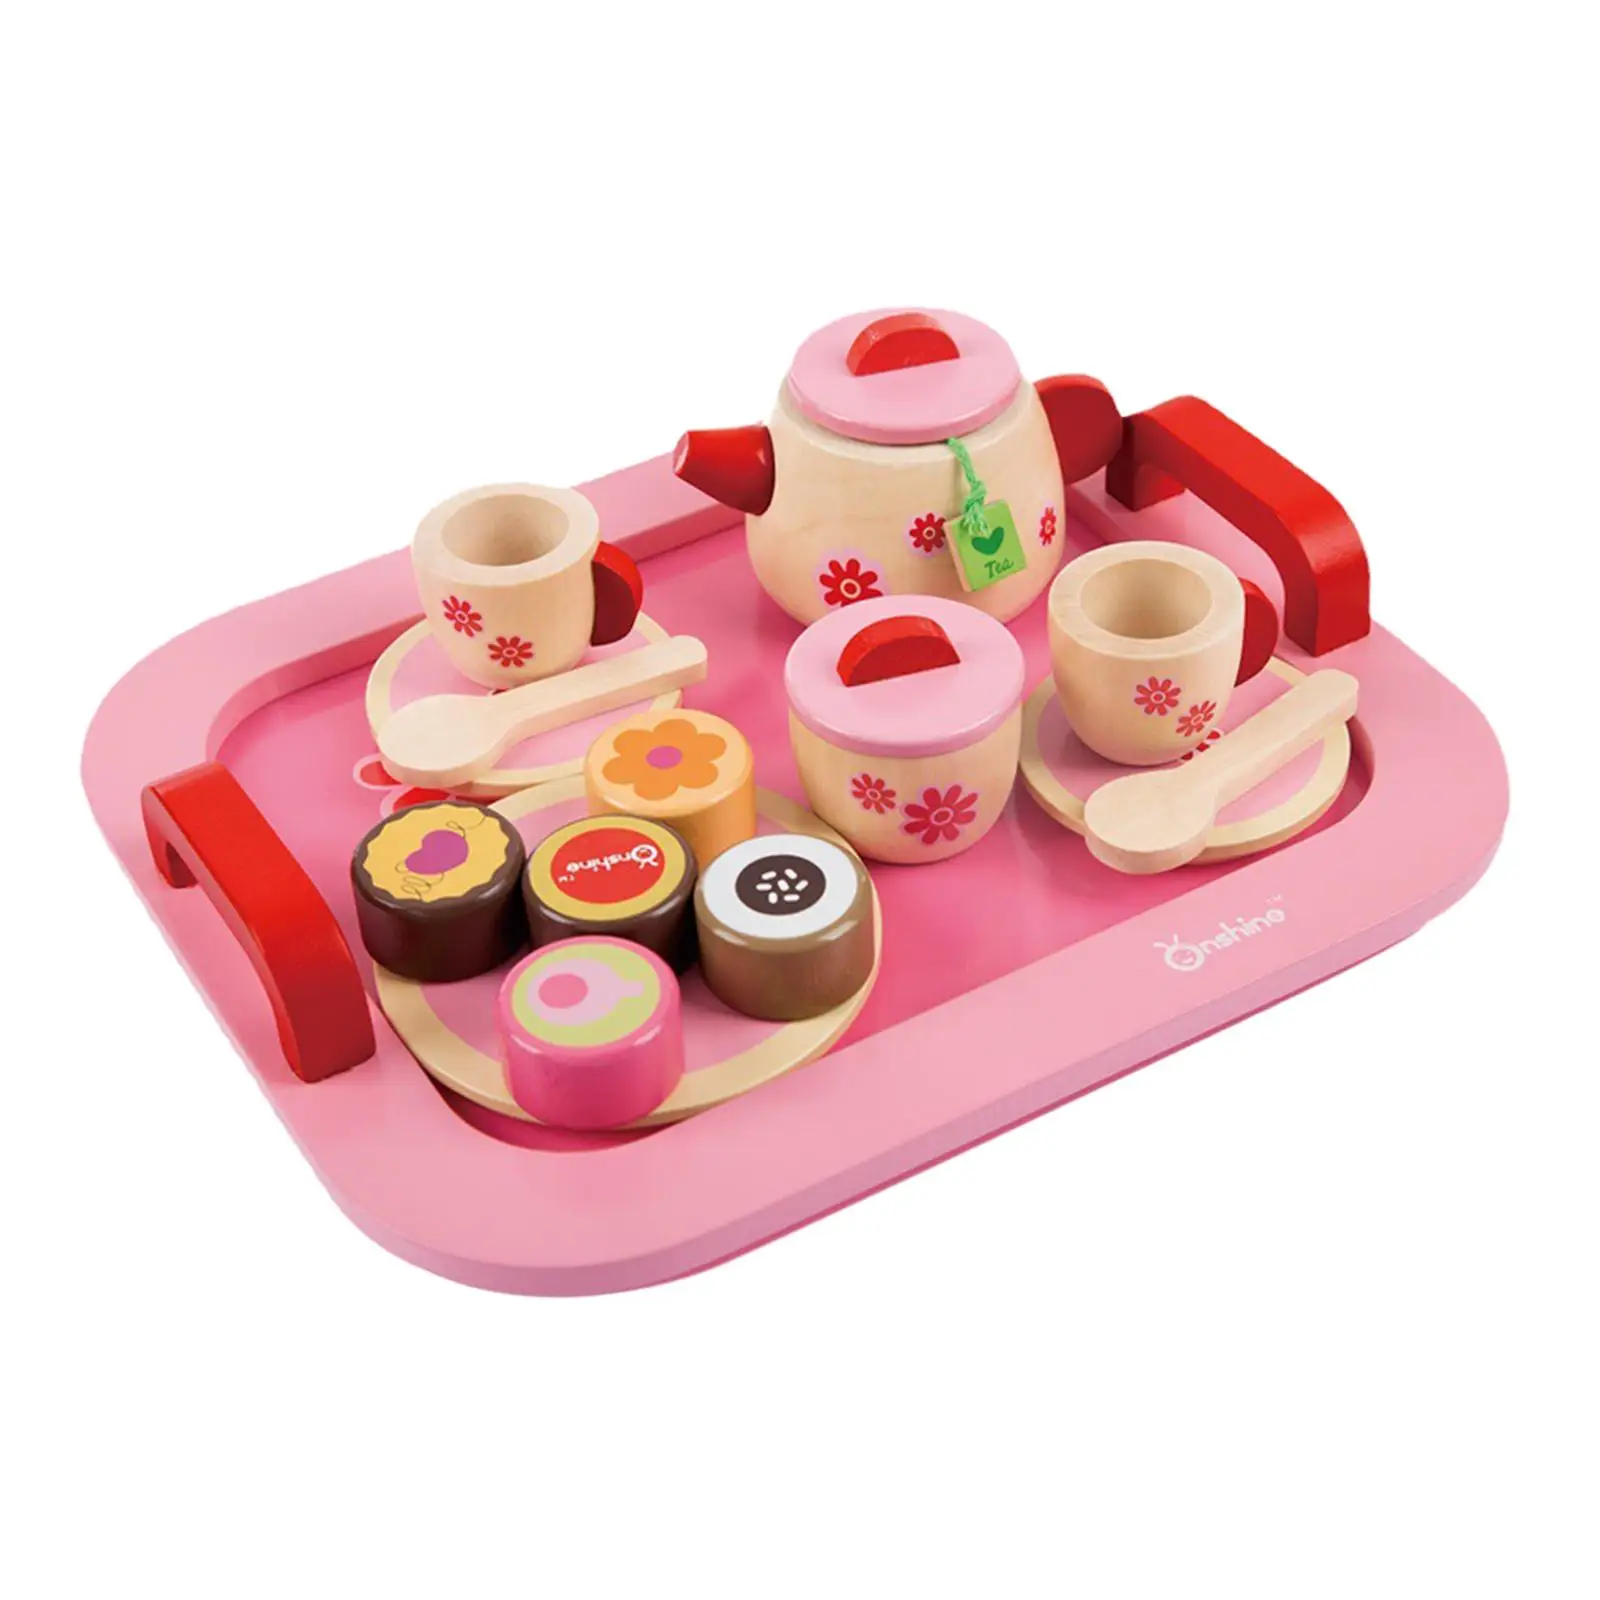 Play Tea Party Accessories Princess Tea Time Toy for Children Girls Boys 3+